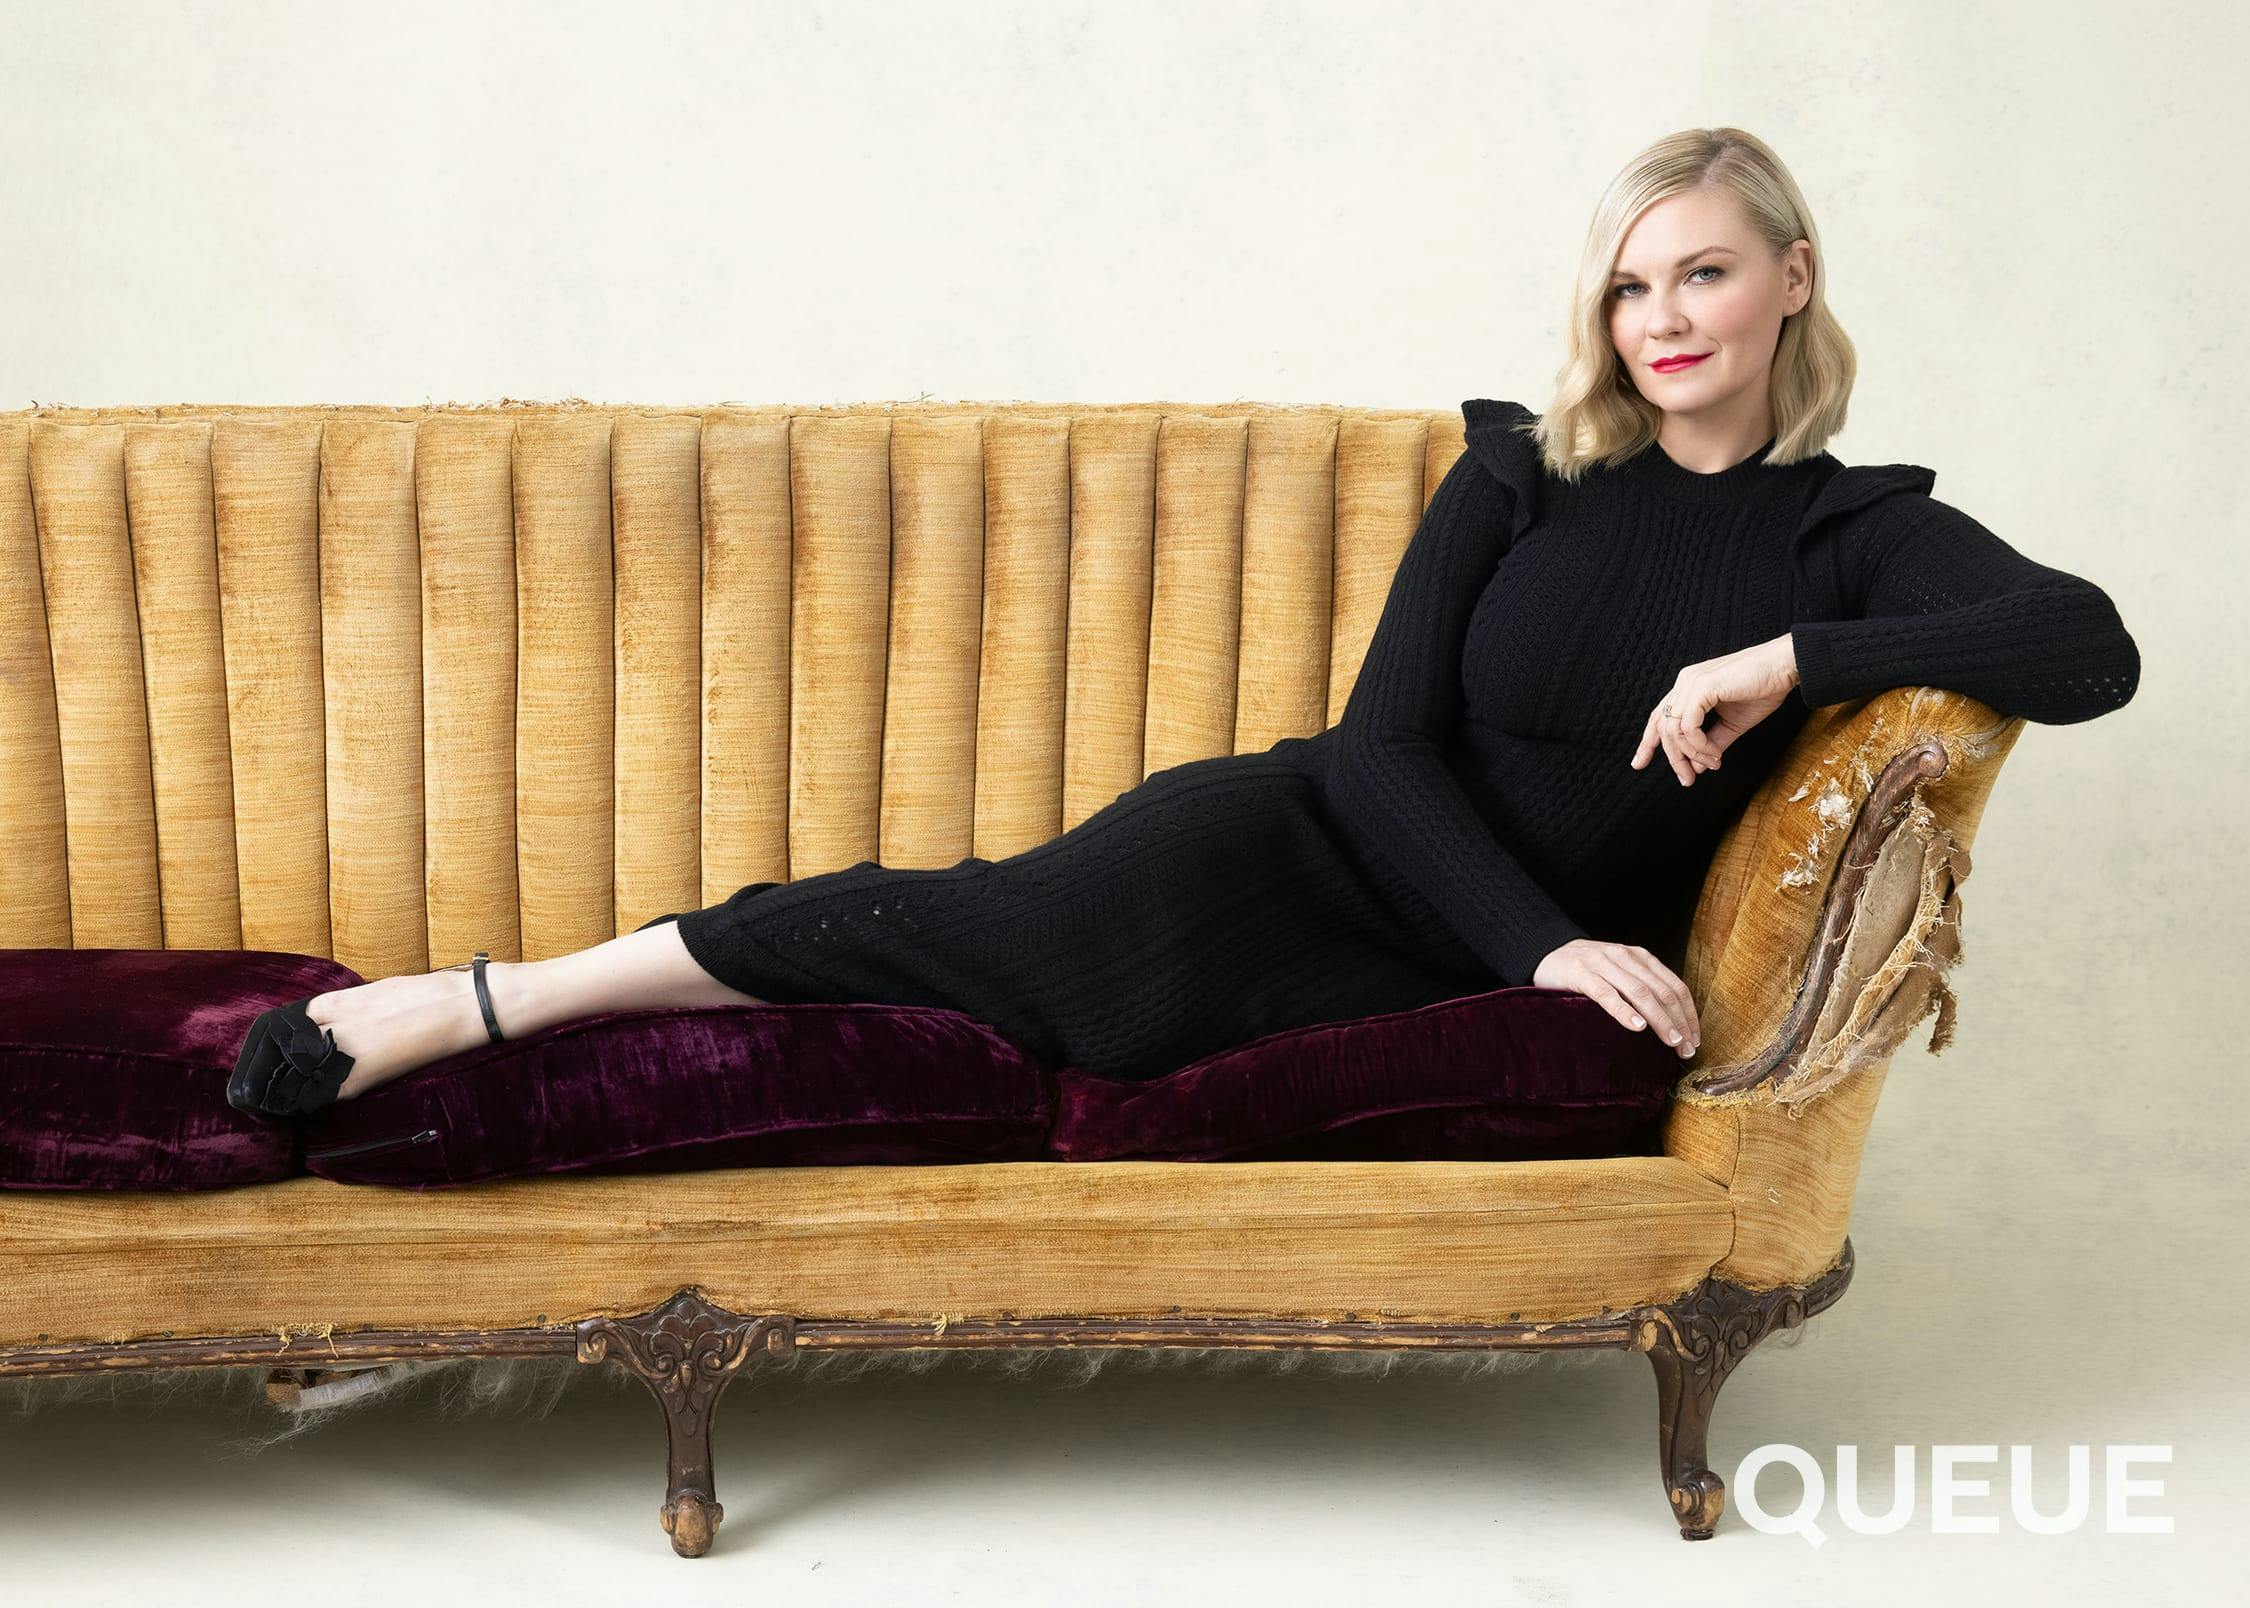 Kirsten Dunst wears a black dress and lounges on a beige and red couch.